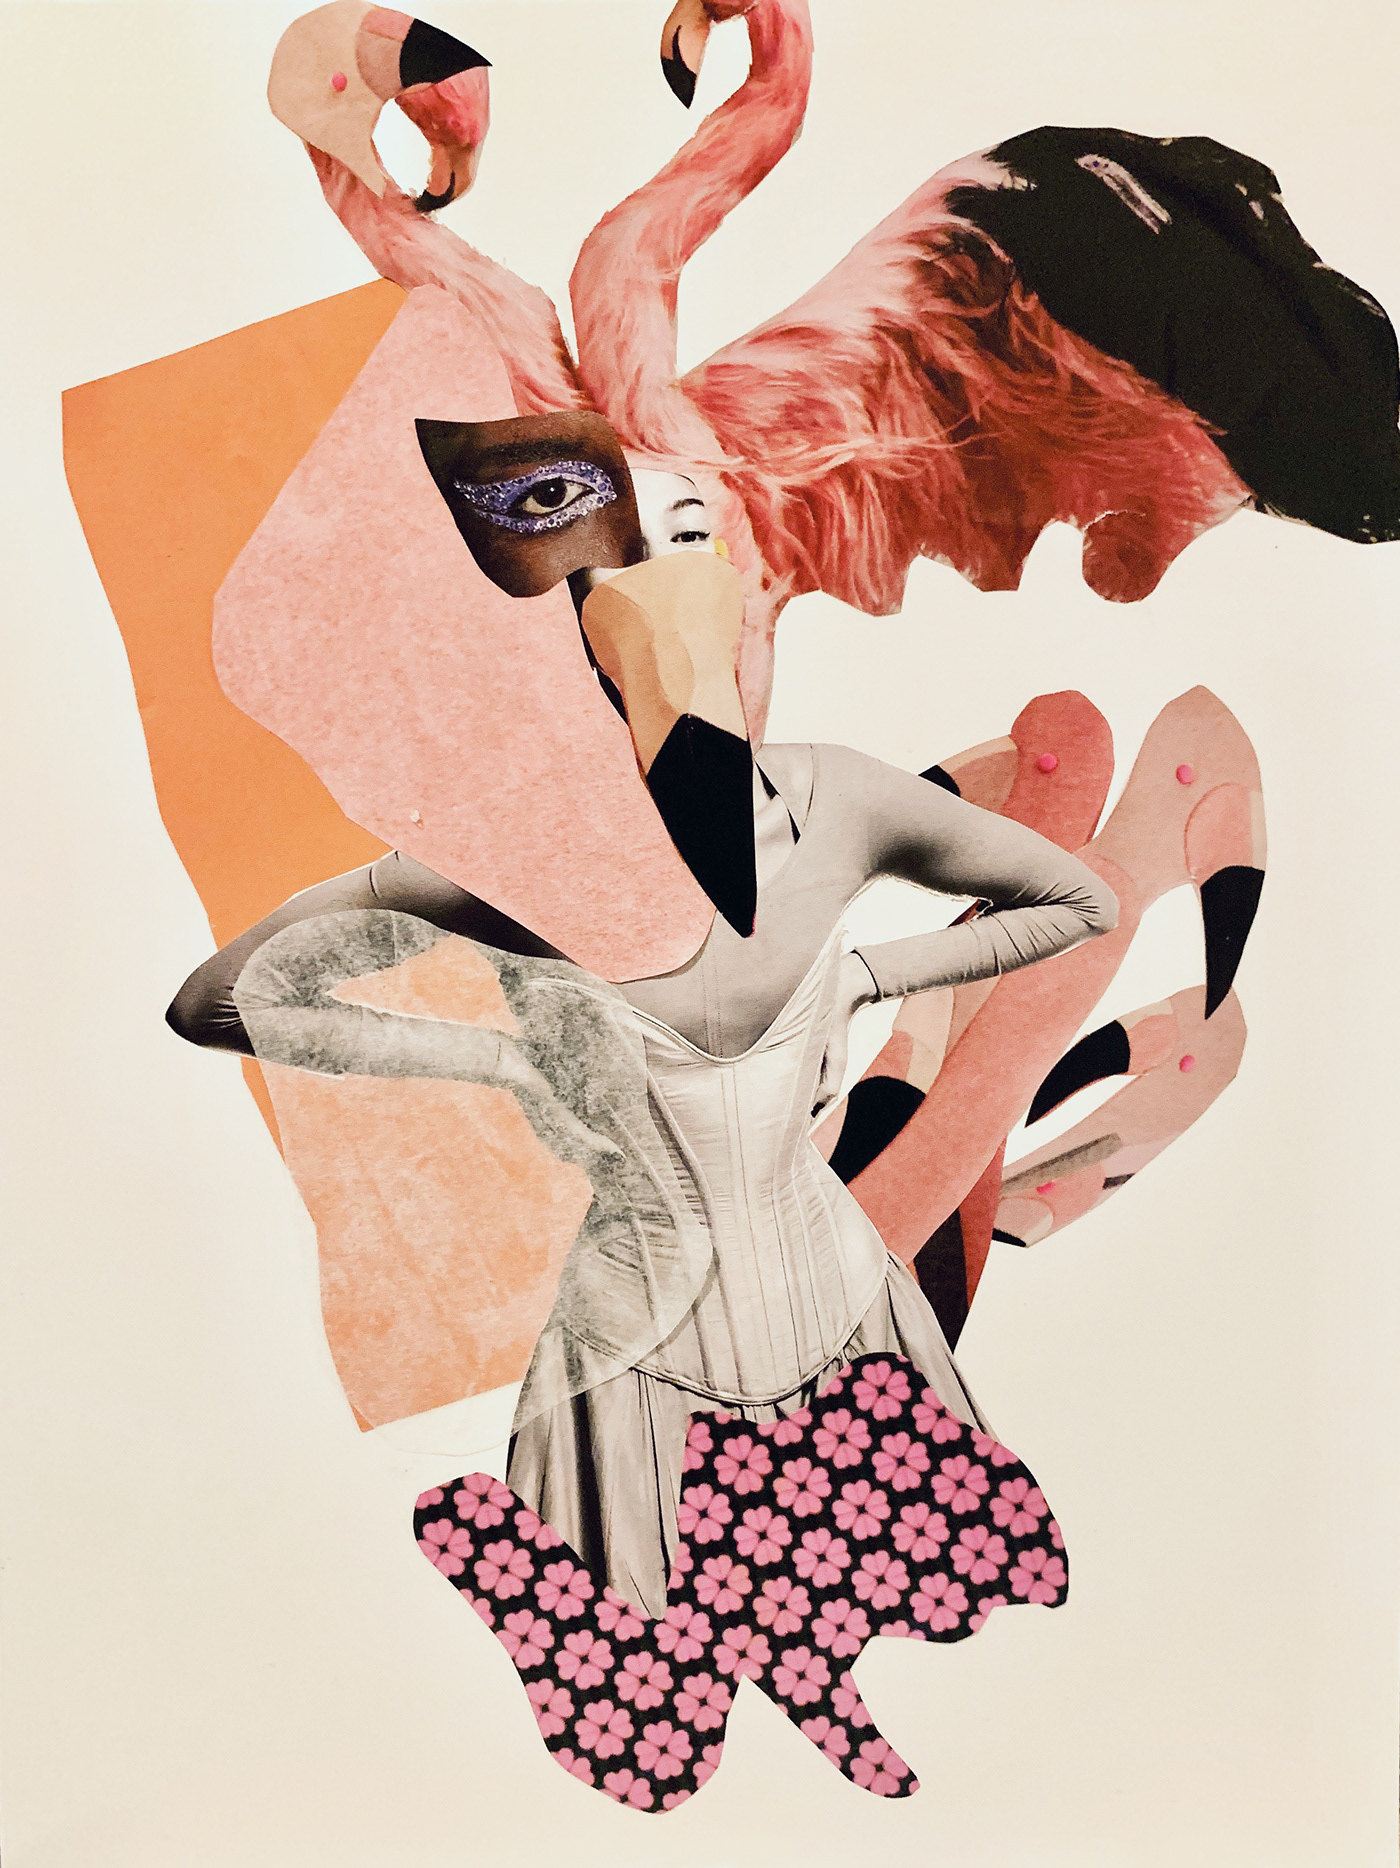 handmade collages on Behance